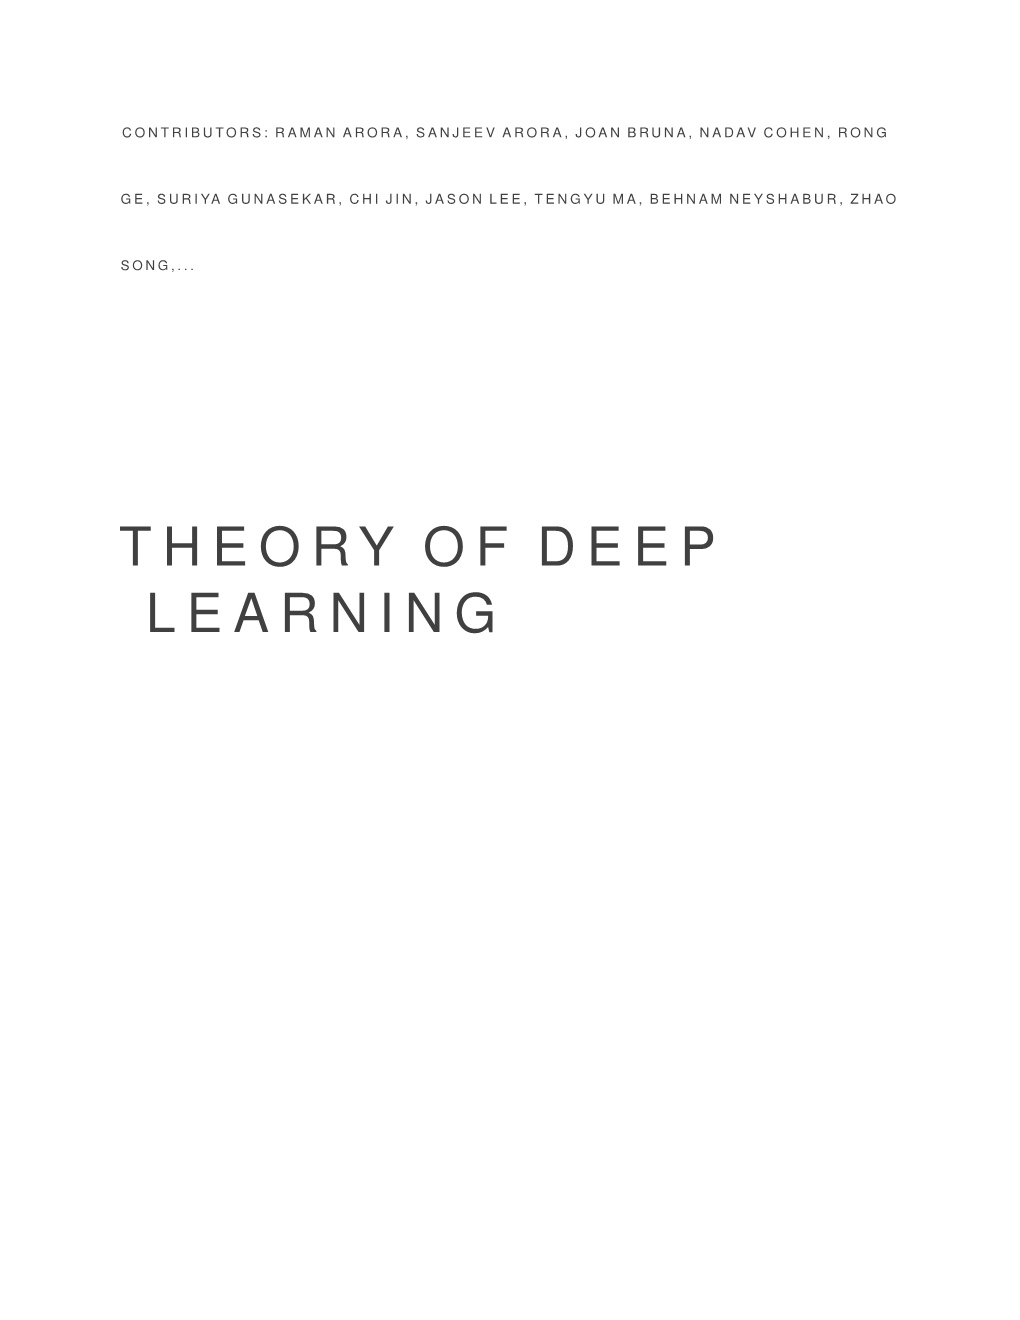 Theory of Deep Learning